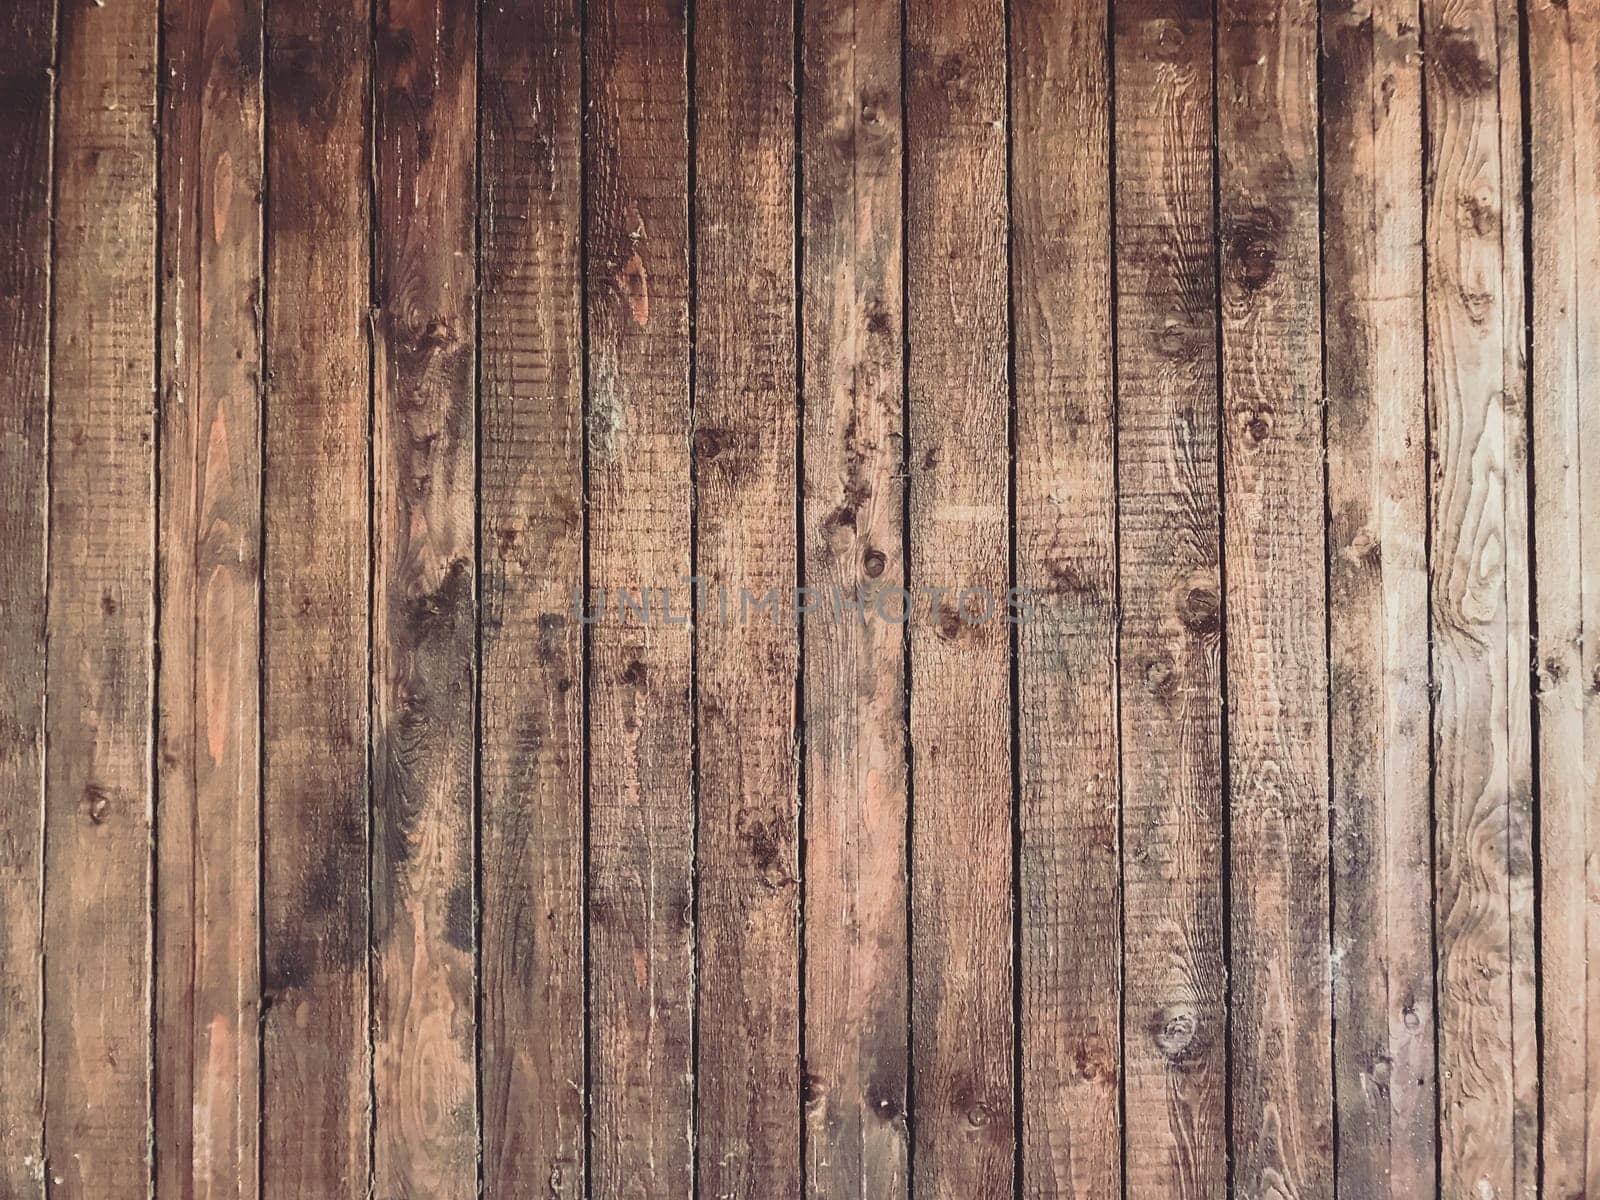 A wooden background with a few small marks on it by Alla_Morozova93